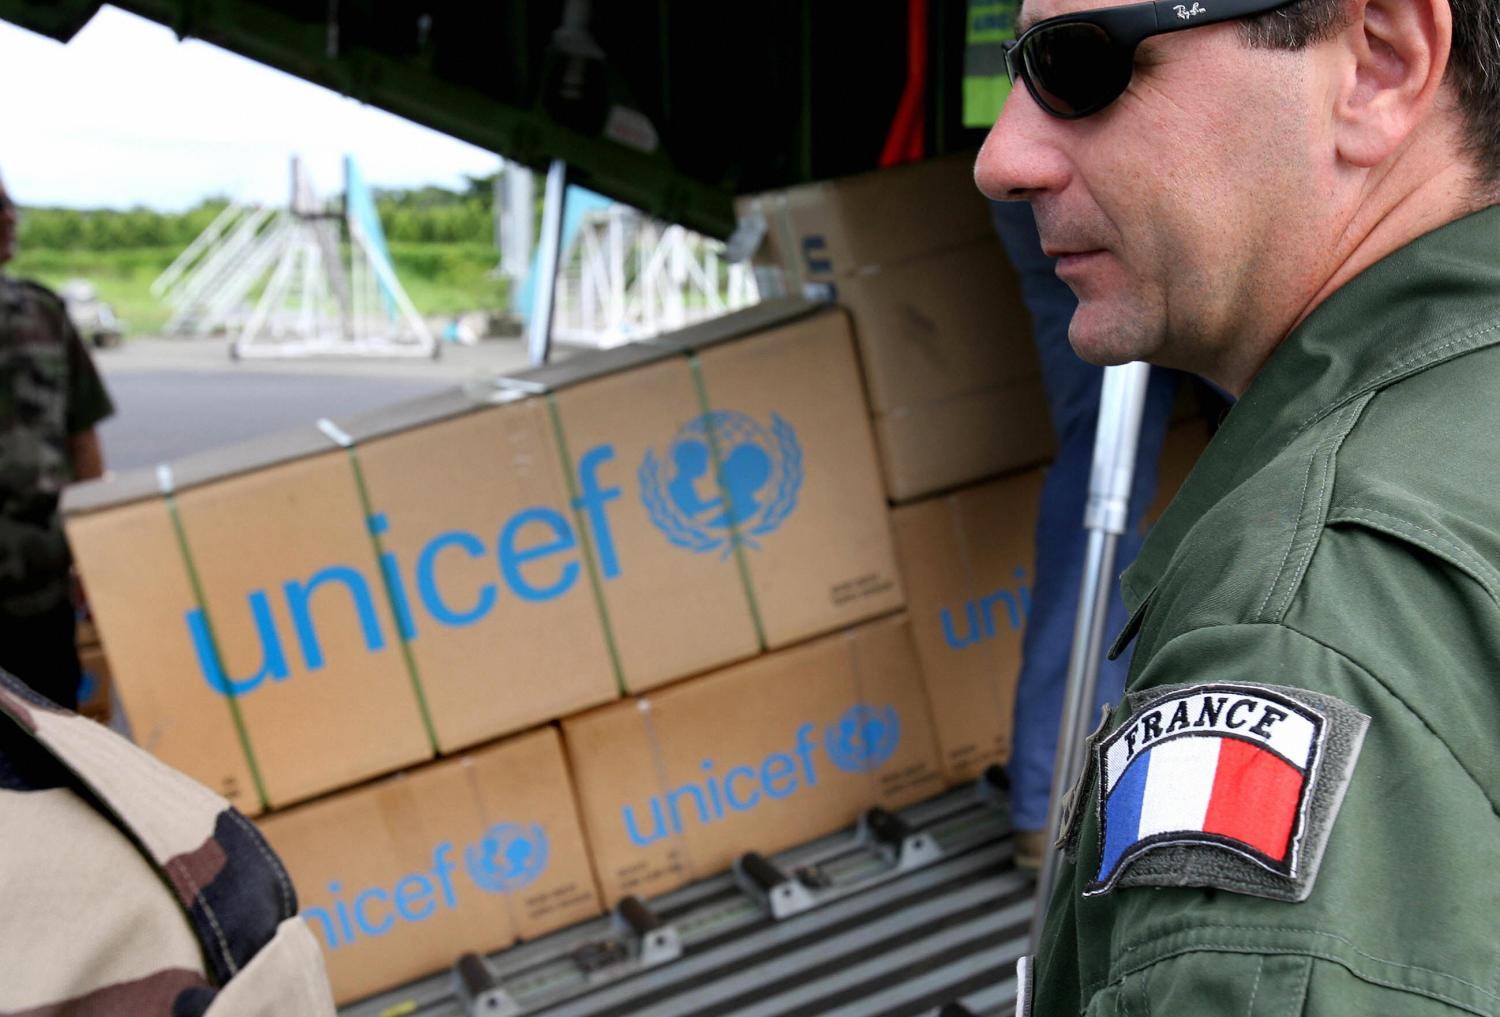 French Air Force personnel load UN relief supplies on 05 April 2007, three days after a tsunami devastated the Solomon Islands. (WILLIAM WEST/AFP via Getty Images)